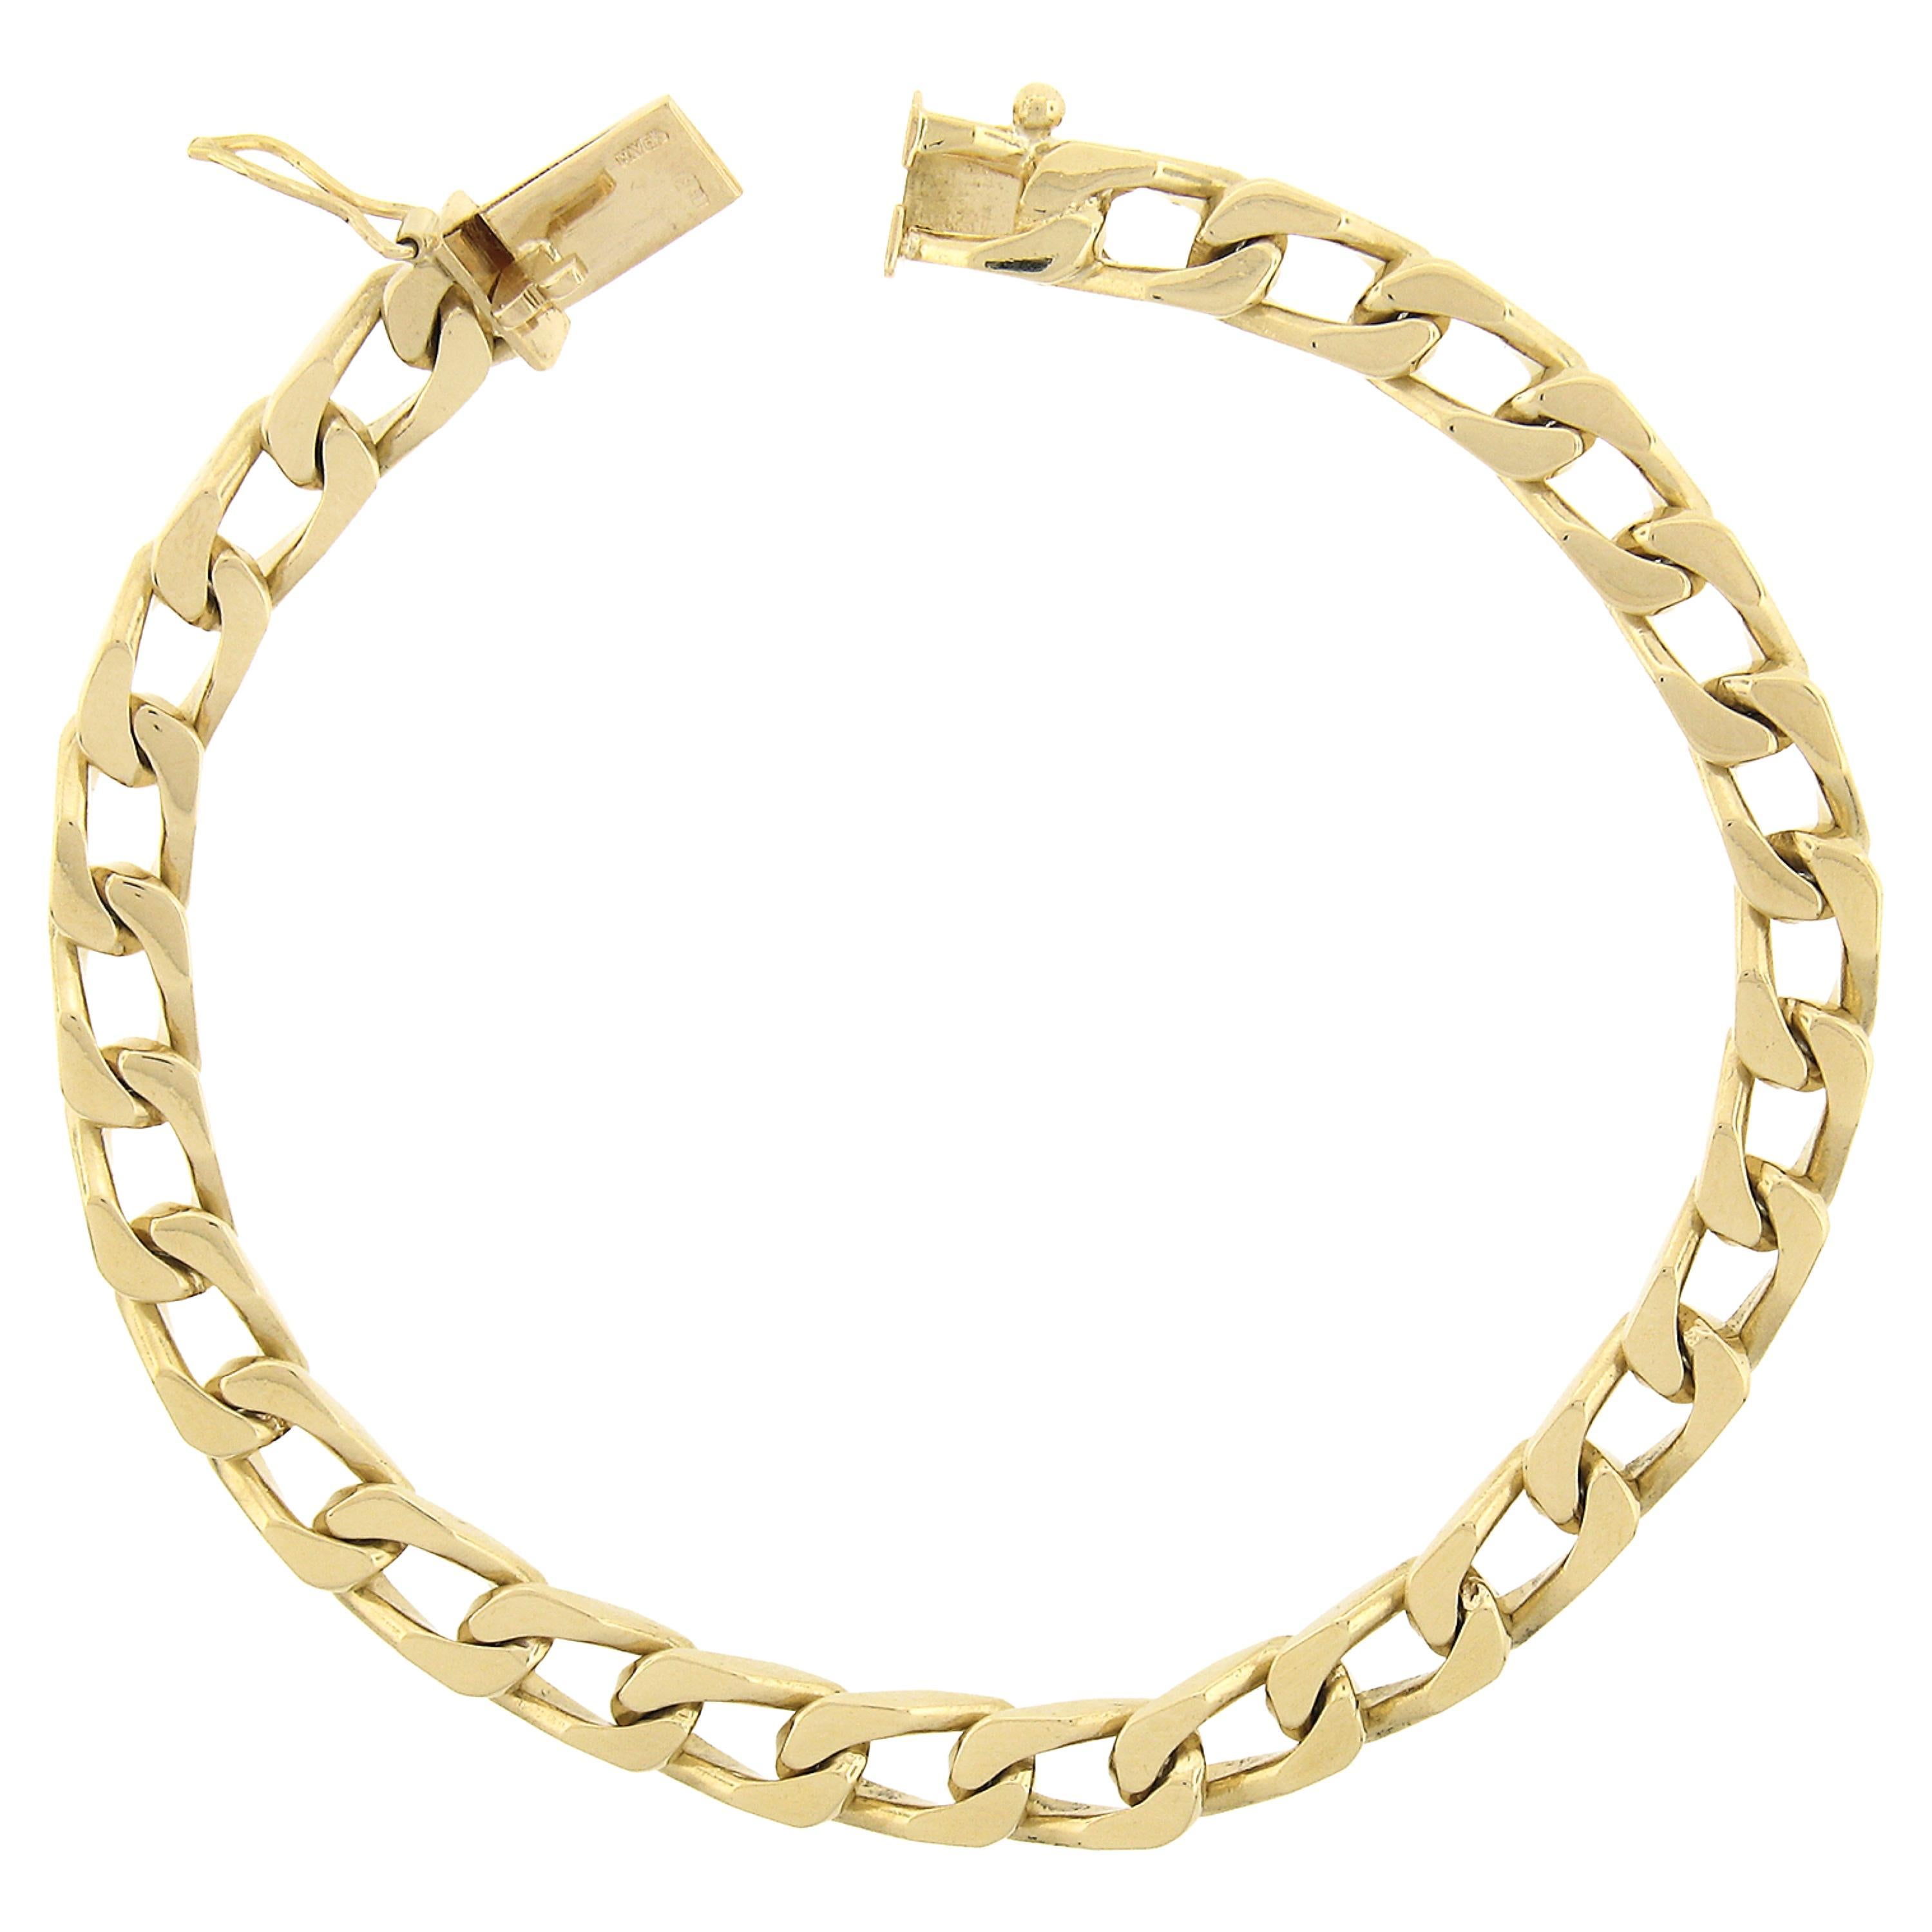 Spanish Unisex Solid 18k Yellow Gold 5.7mm 7" Cuban Curb Link Chain Bracelet For Sale